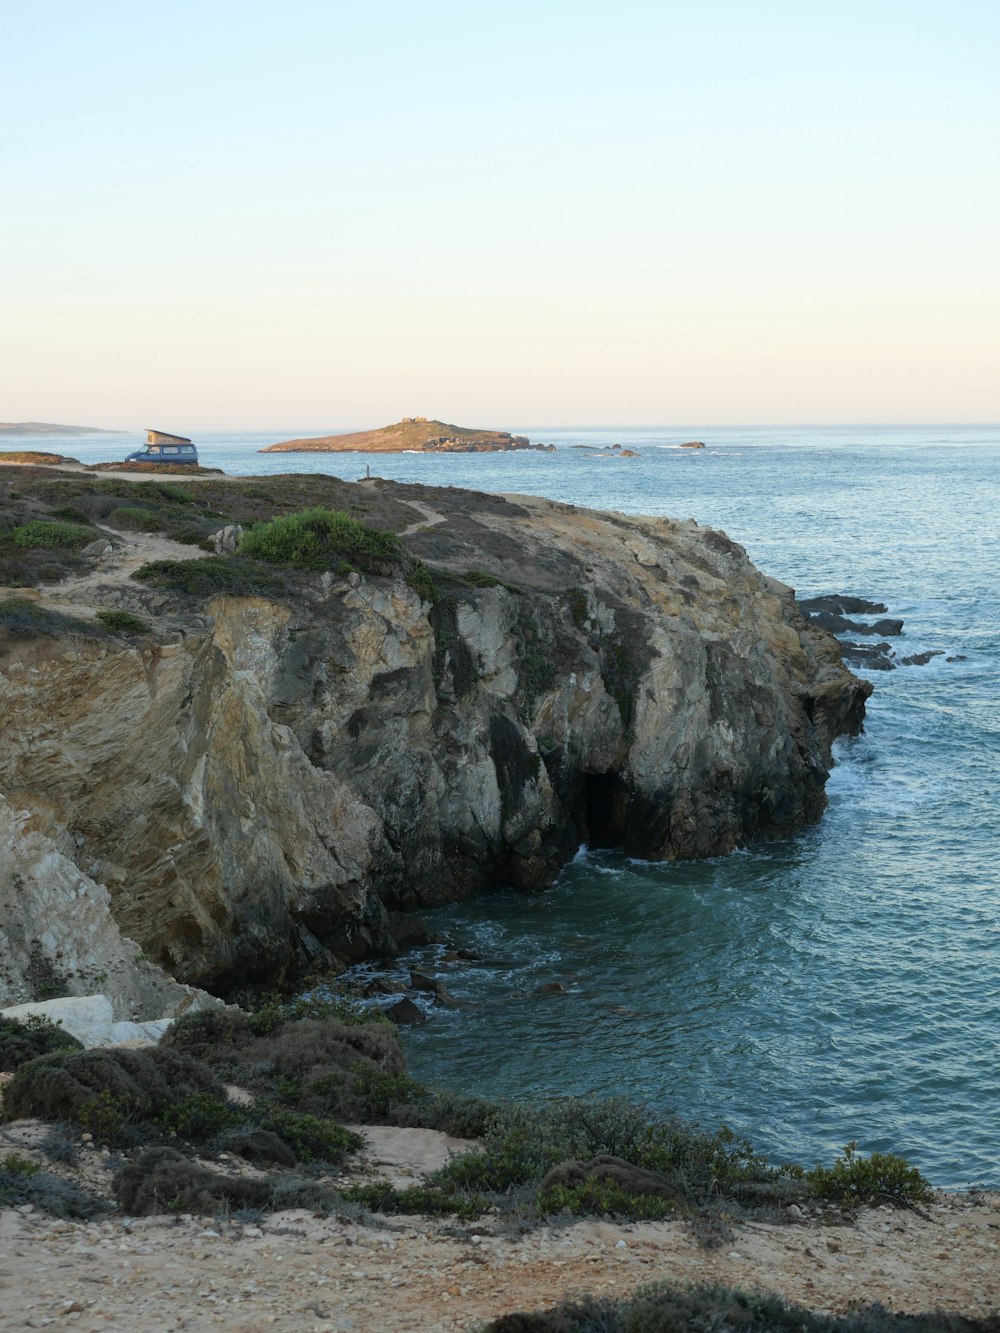 a view of a body of water near a rocky cliff